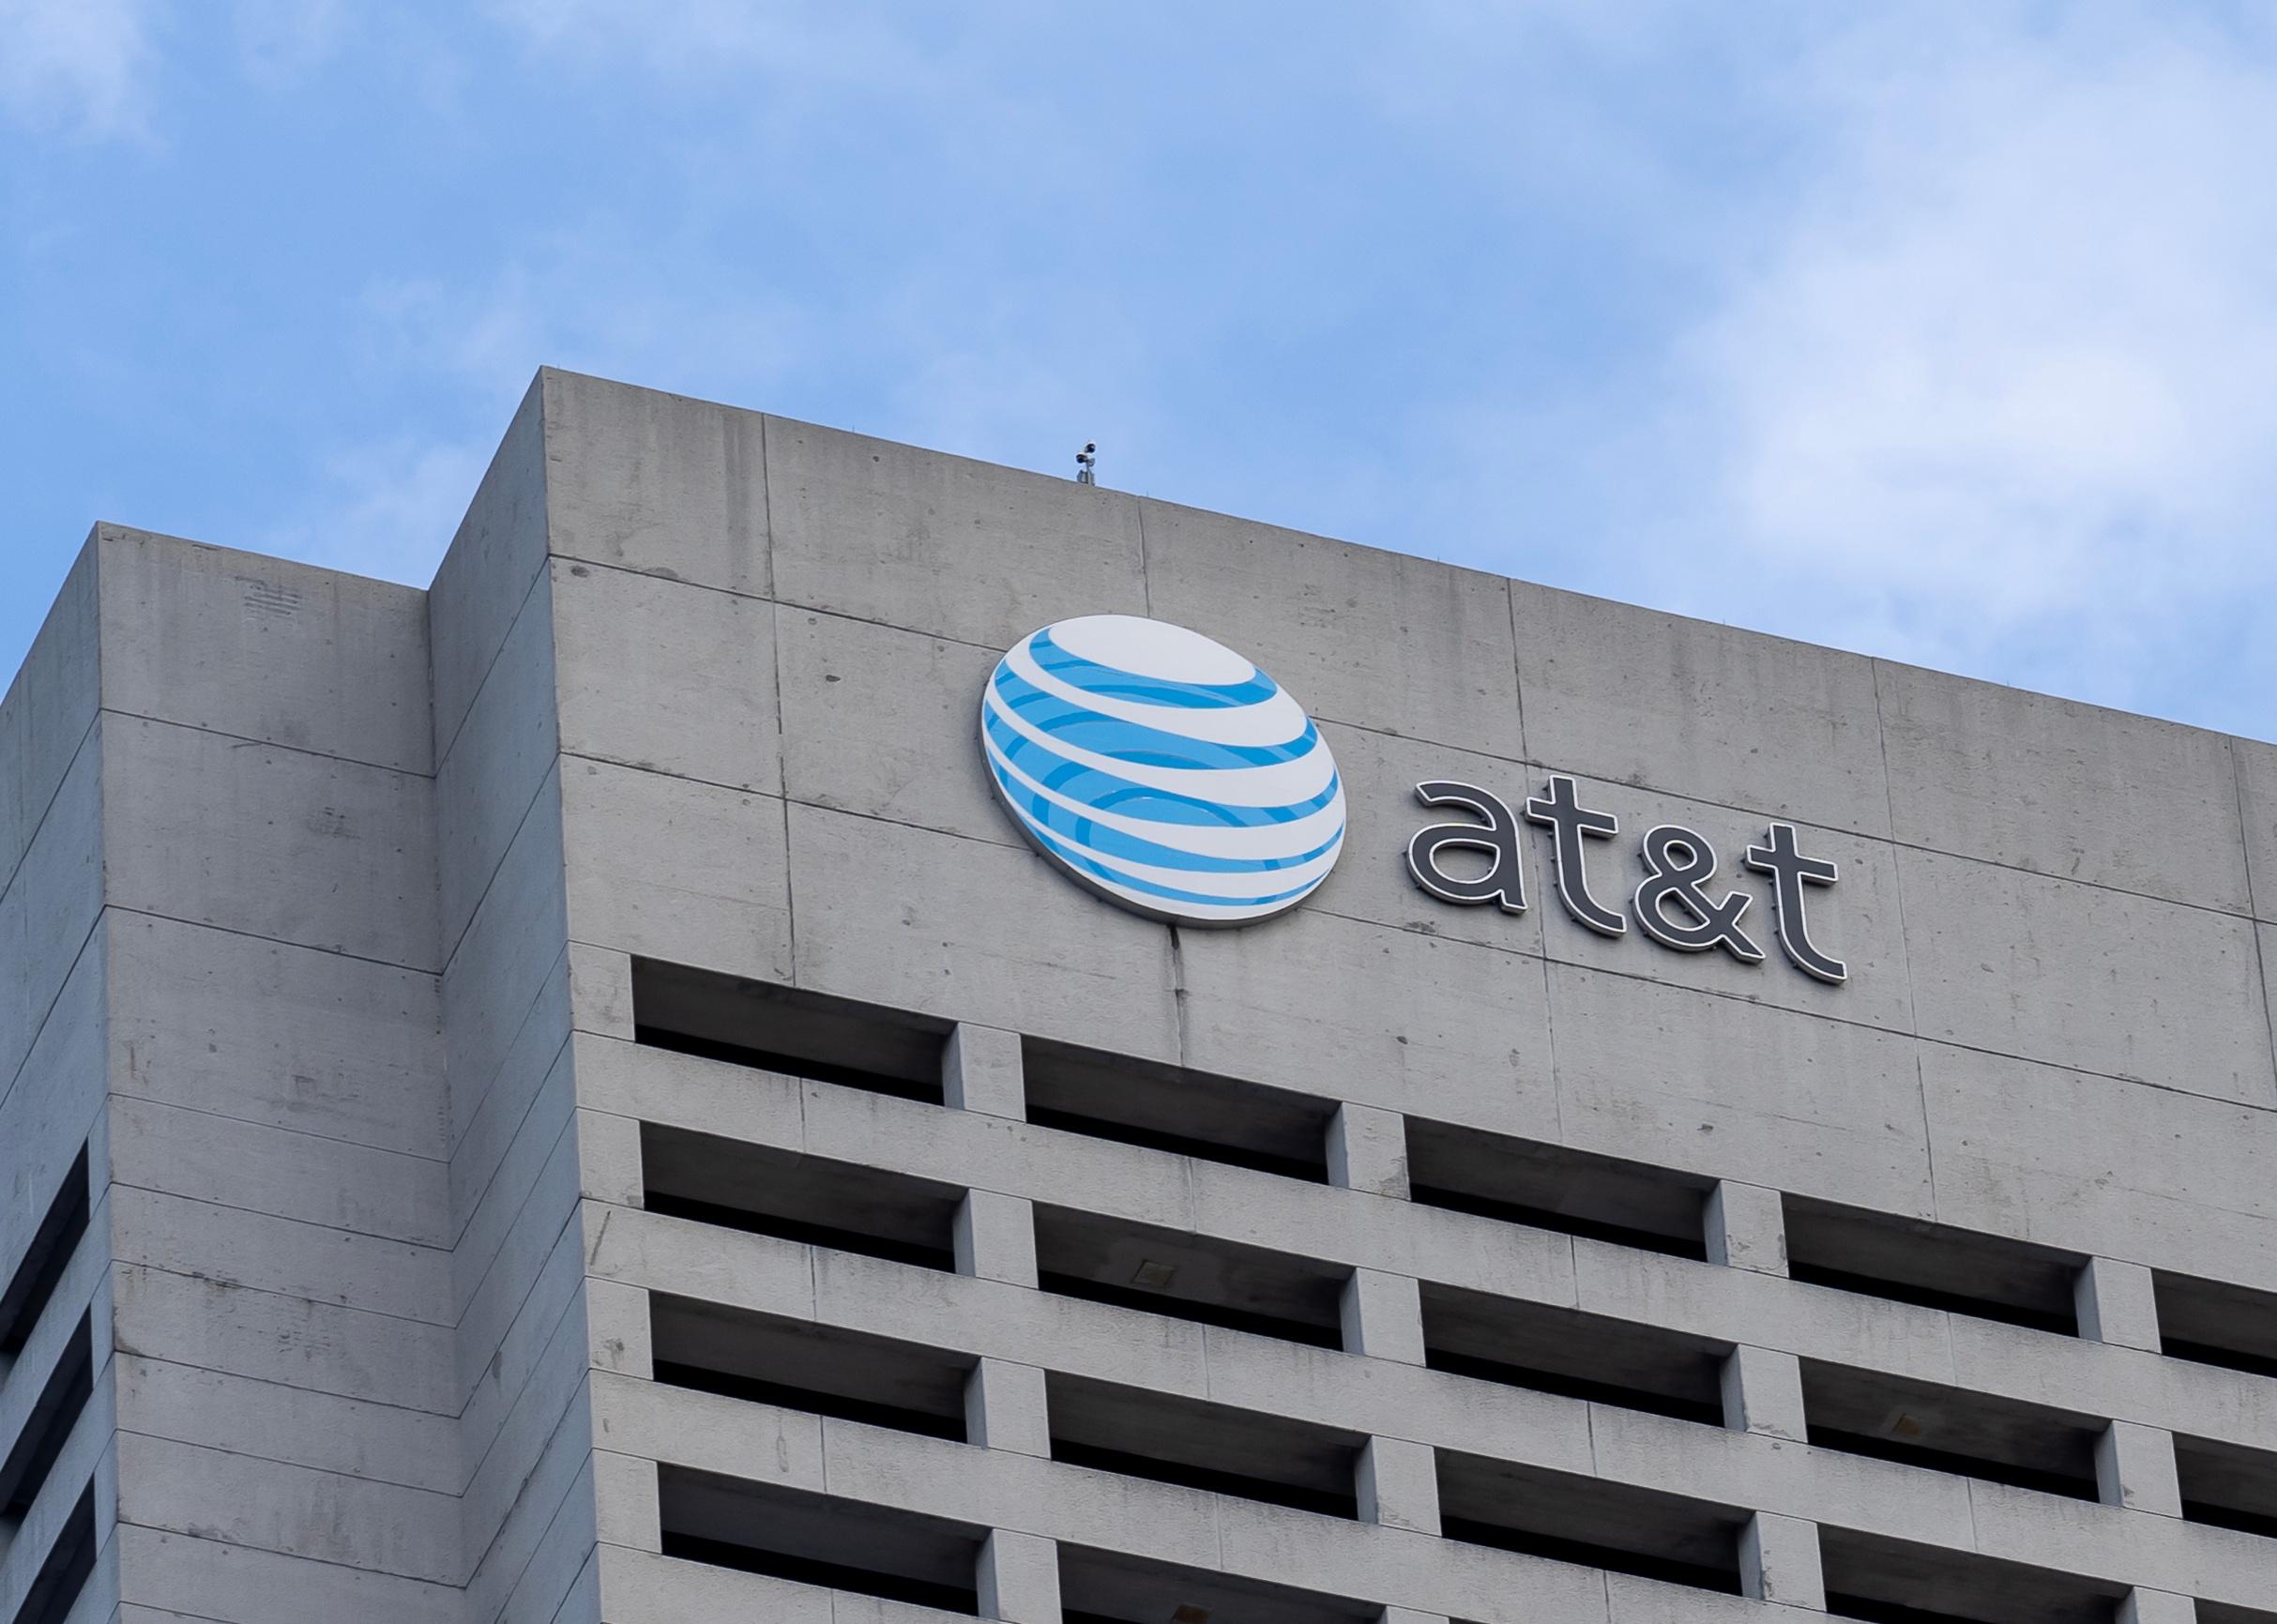 AT&T sign and logo on the building in Atlanta, Georgia.